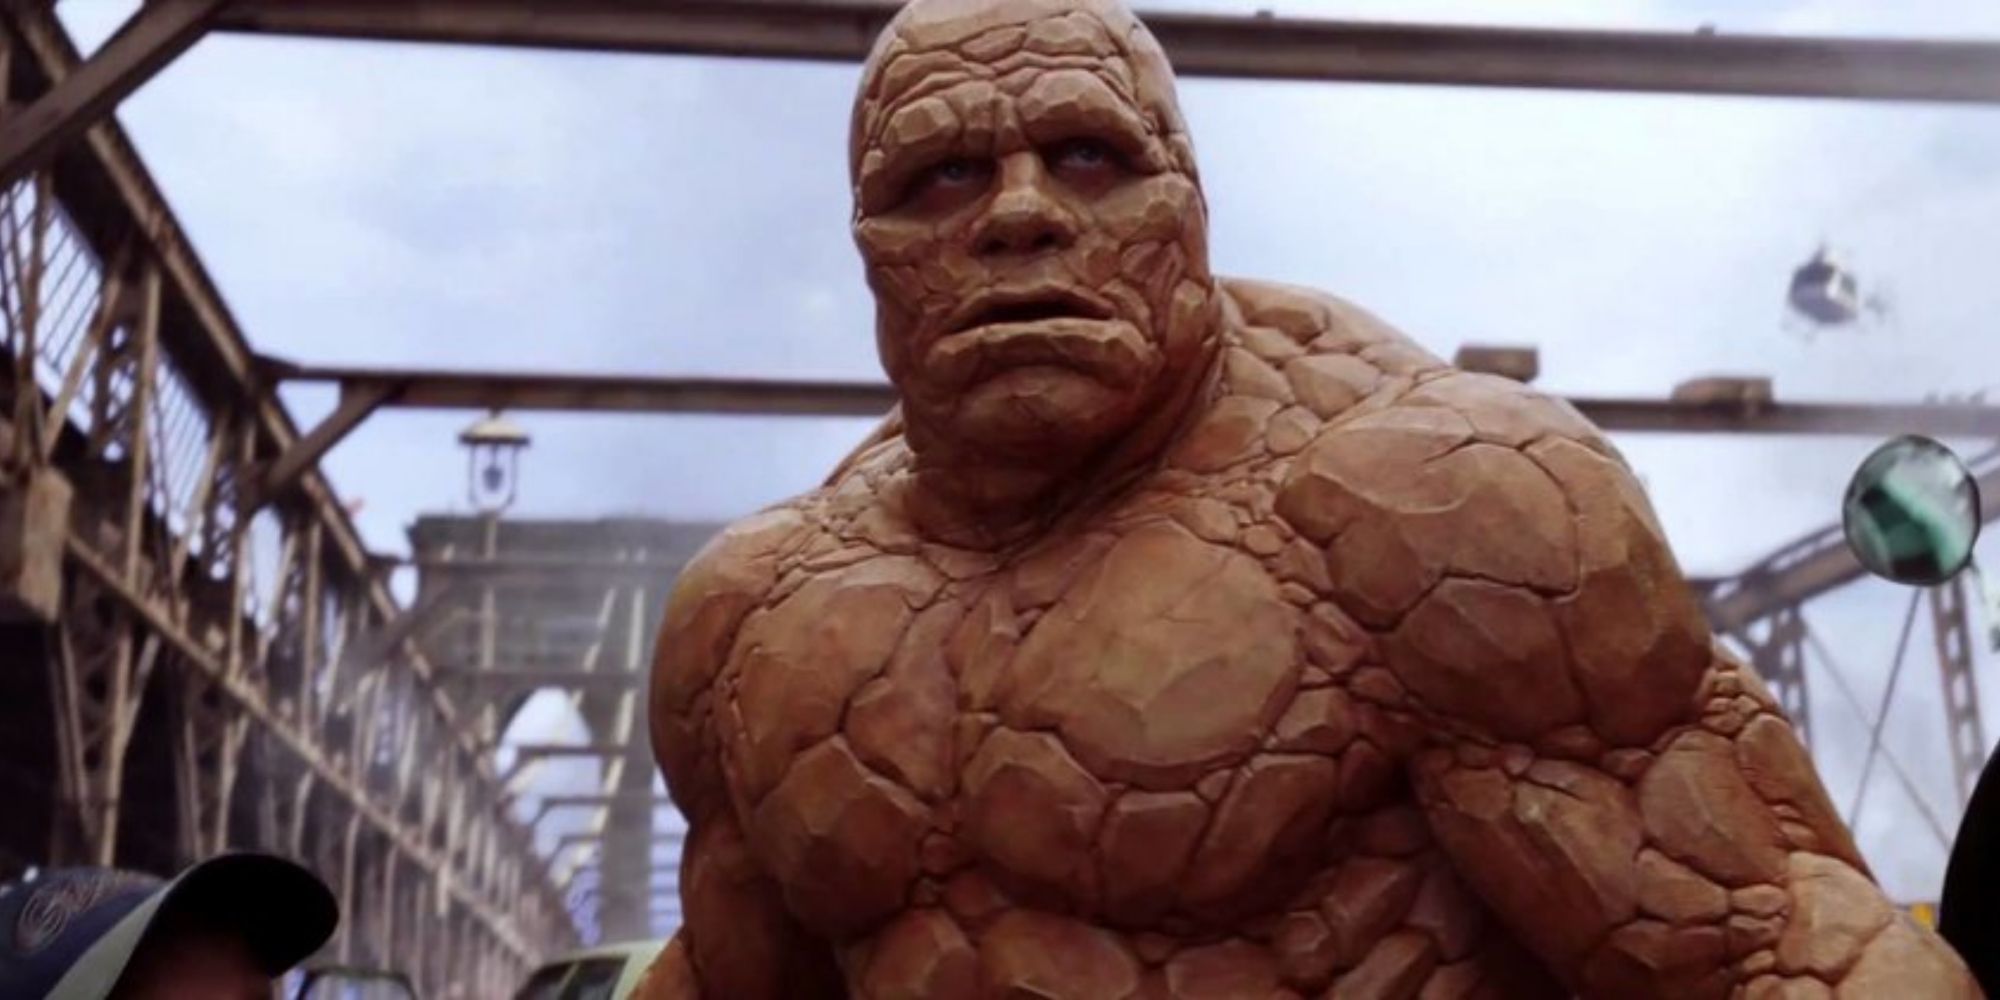 Michael Chiklis as Ben Grimm aka The Thing in Fantastic Four (2005)